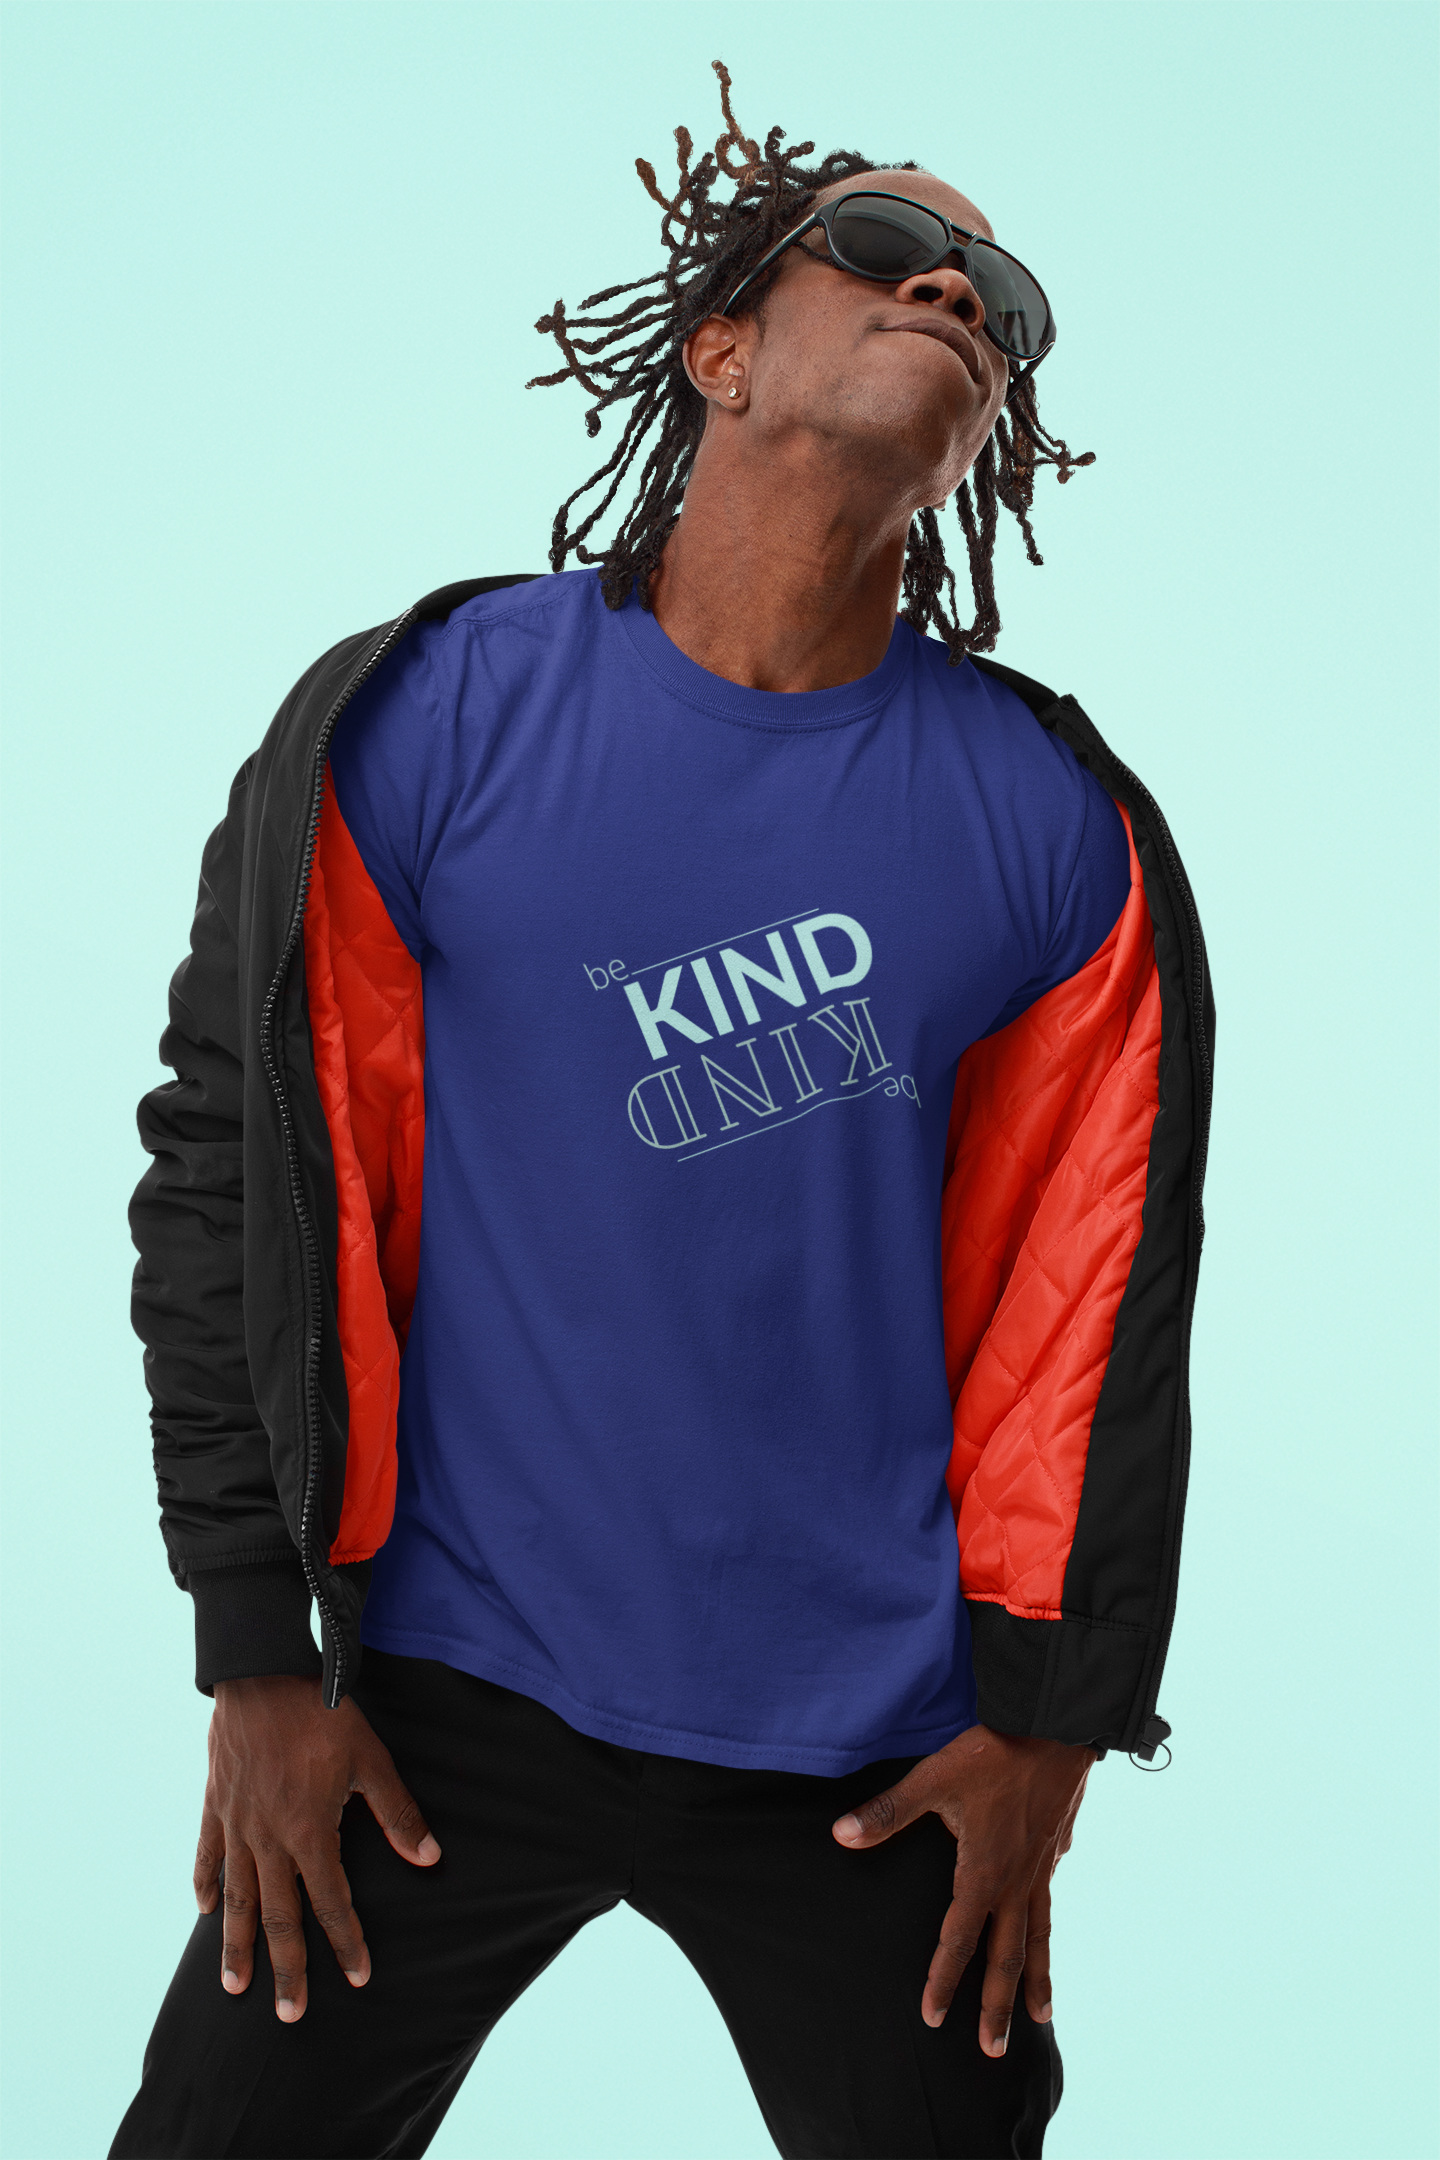 Oversized Black tshirt in Royal Blue color with the slogan Be Kind